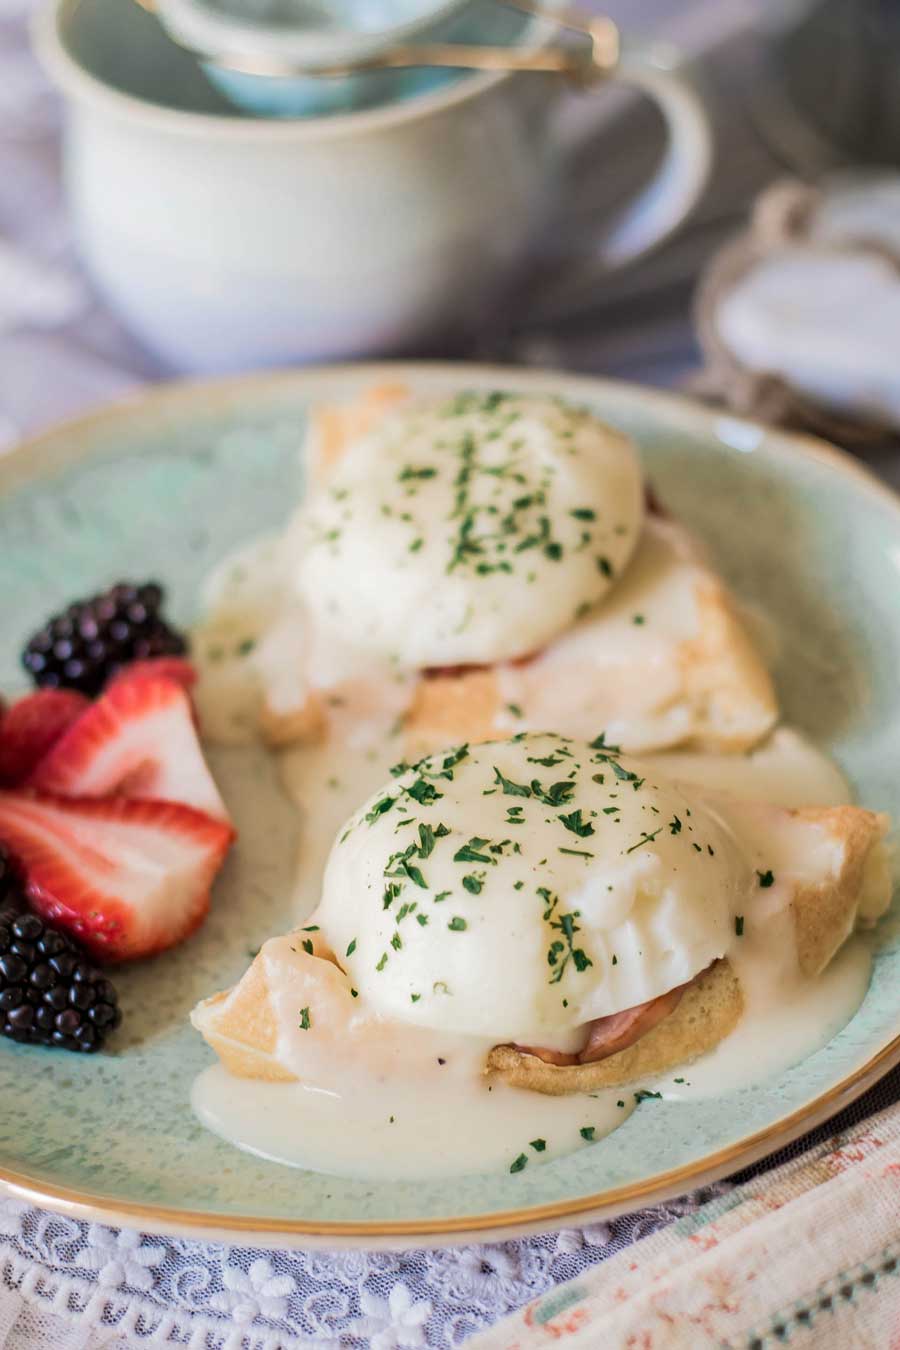 Eggs benedict on the table.